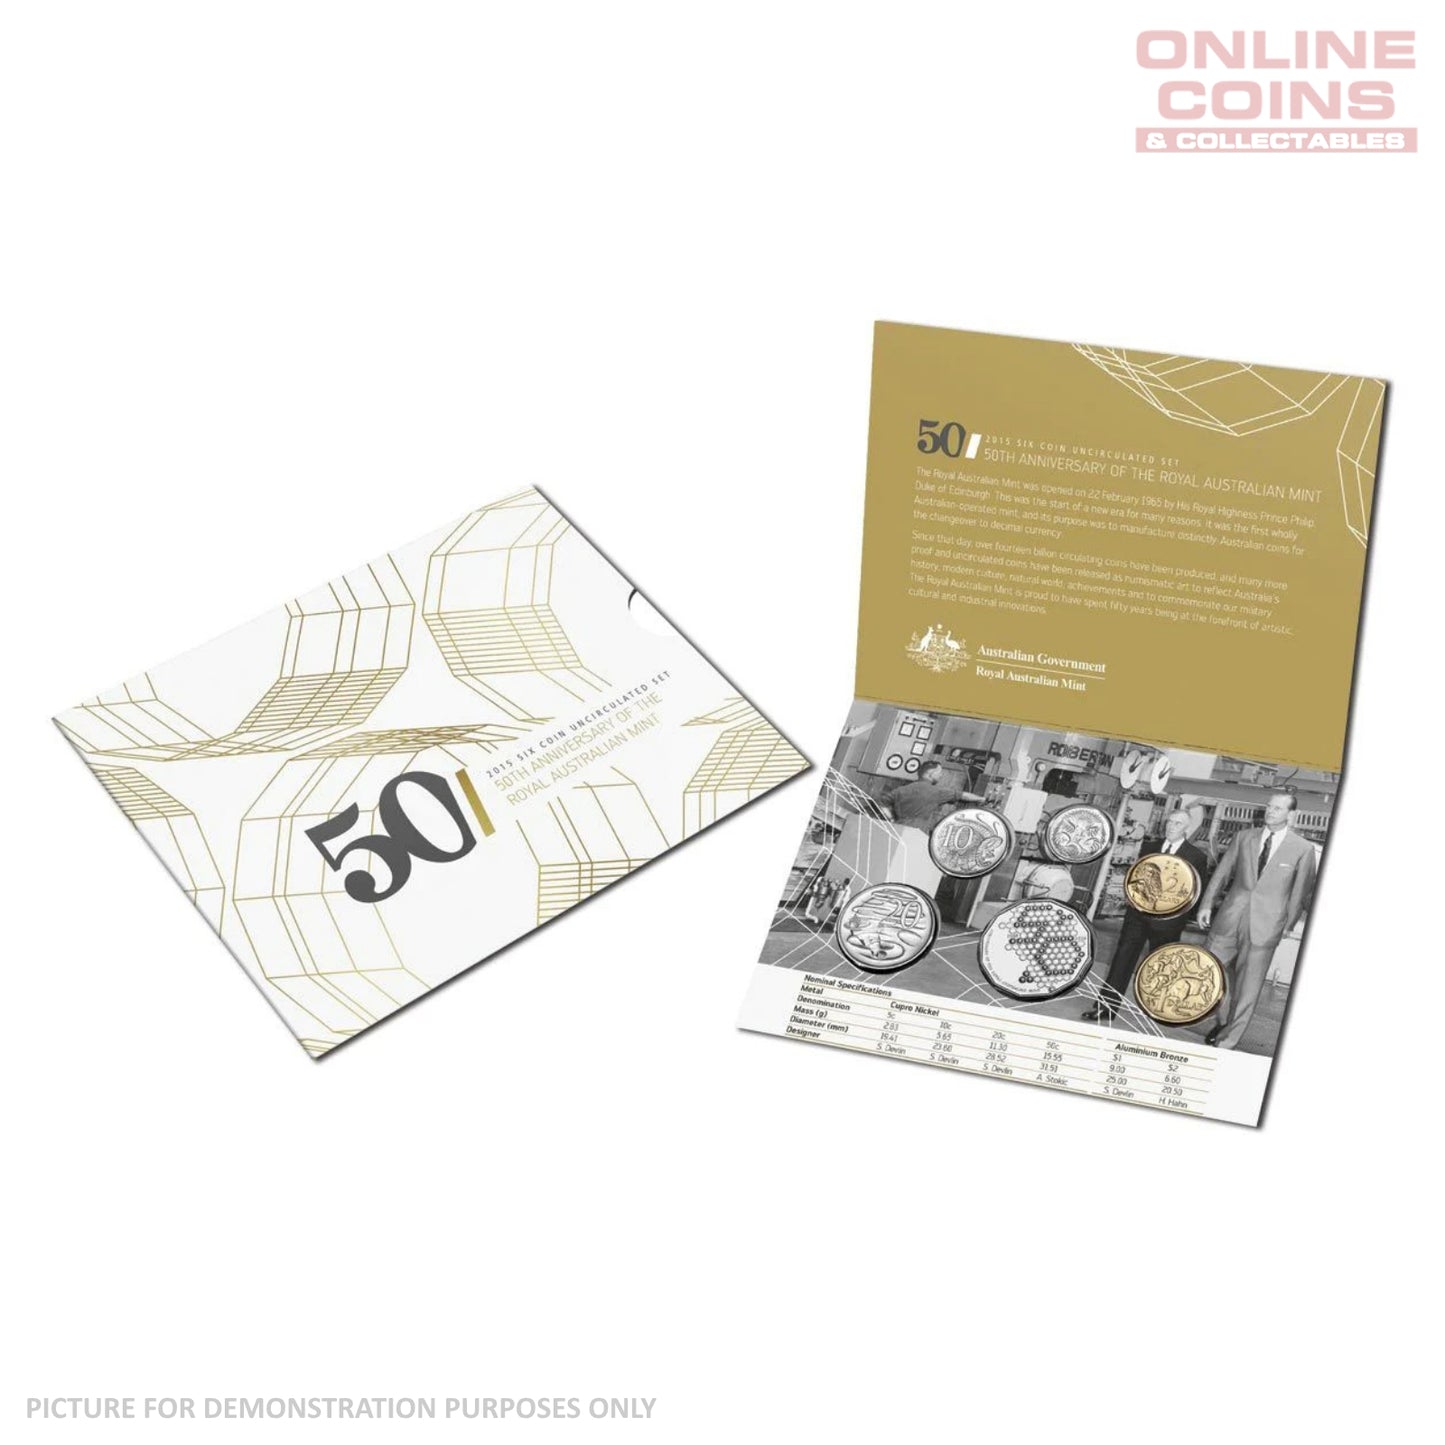 2015 Uncirculated Coin Year Set - 50th Anniversary of the Royal Australian Mint